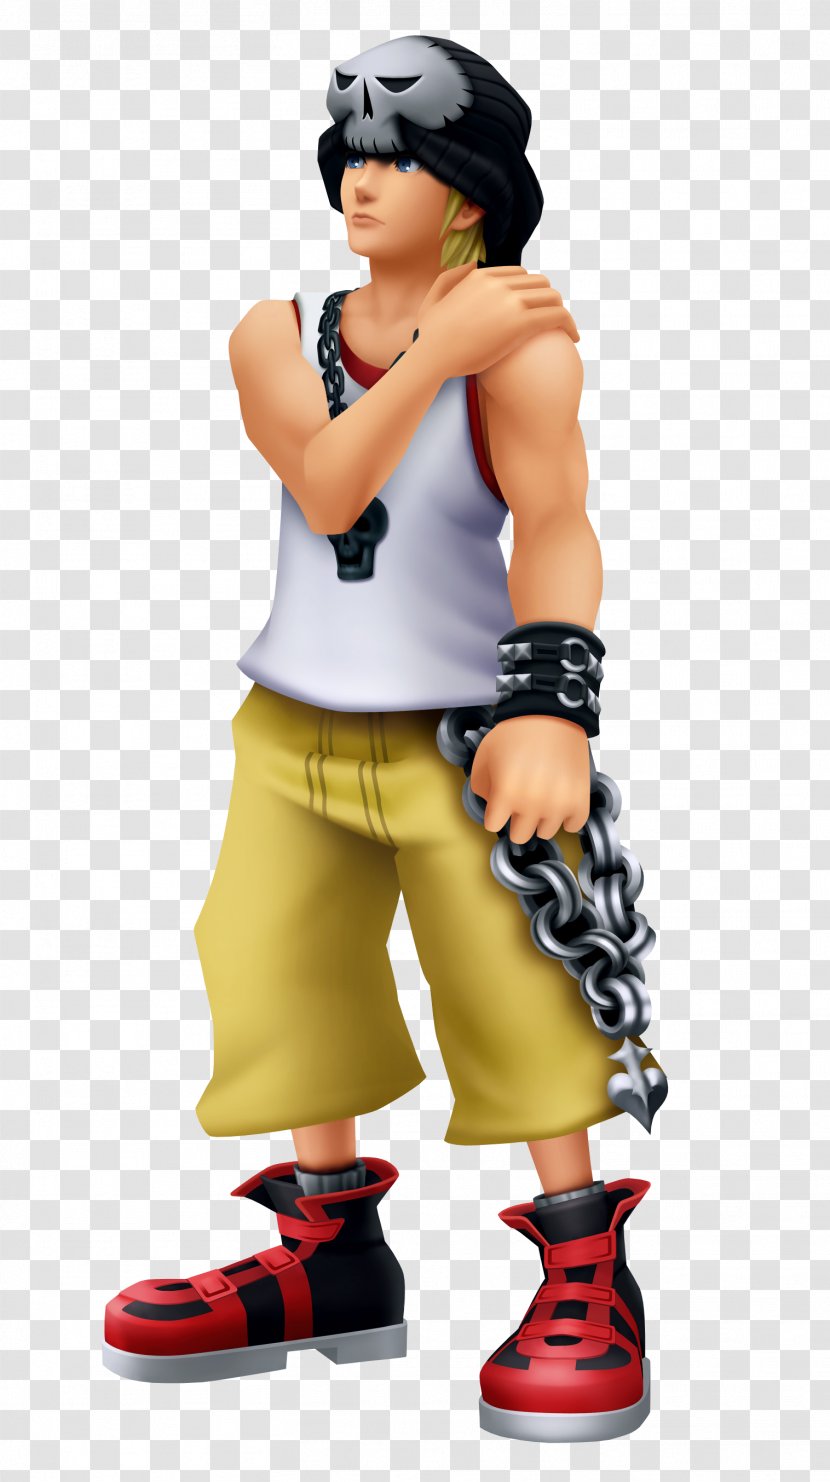 Kingdom Hearts 3D: Dream Drop Distance III The World Ends With You Video Game - Square Enix Co Ltd Transparent PNG